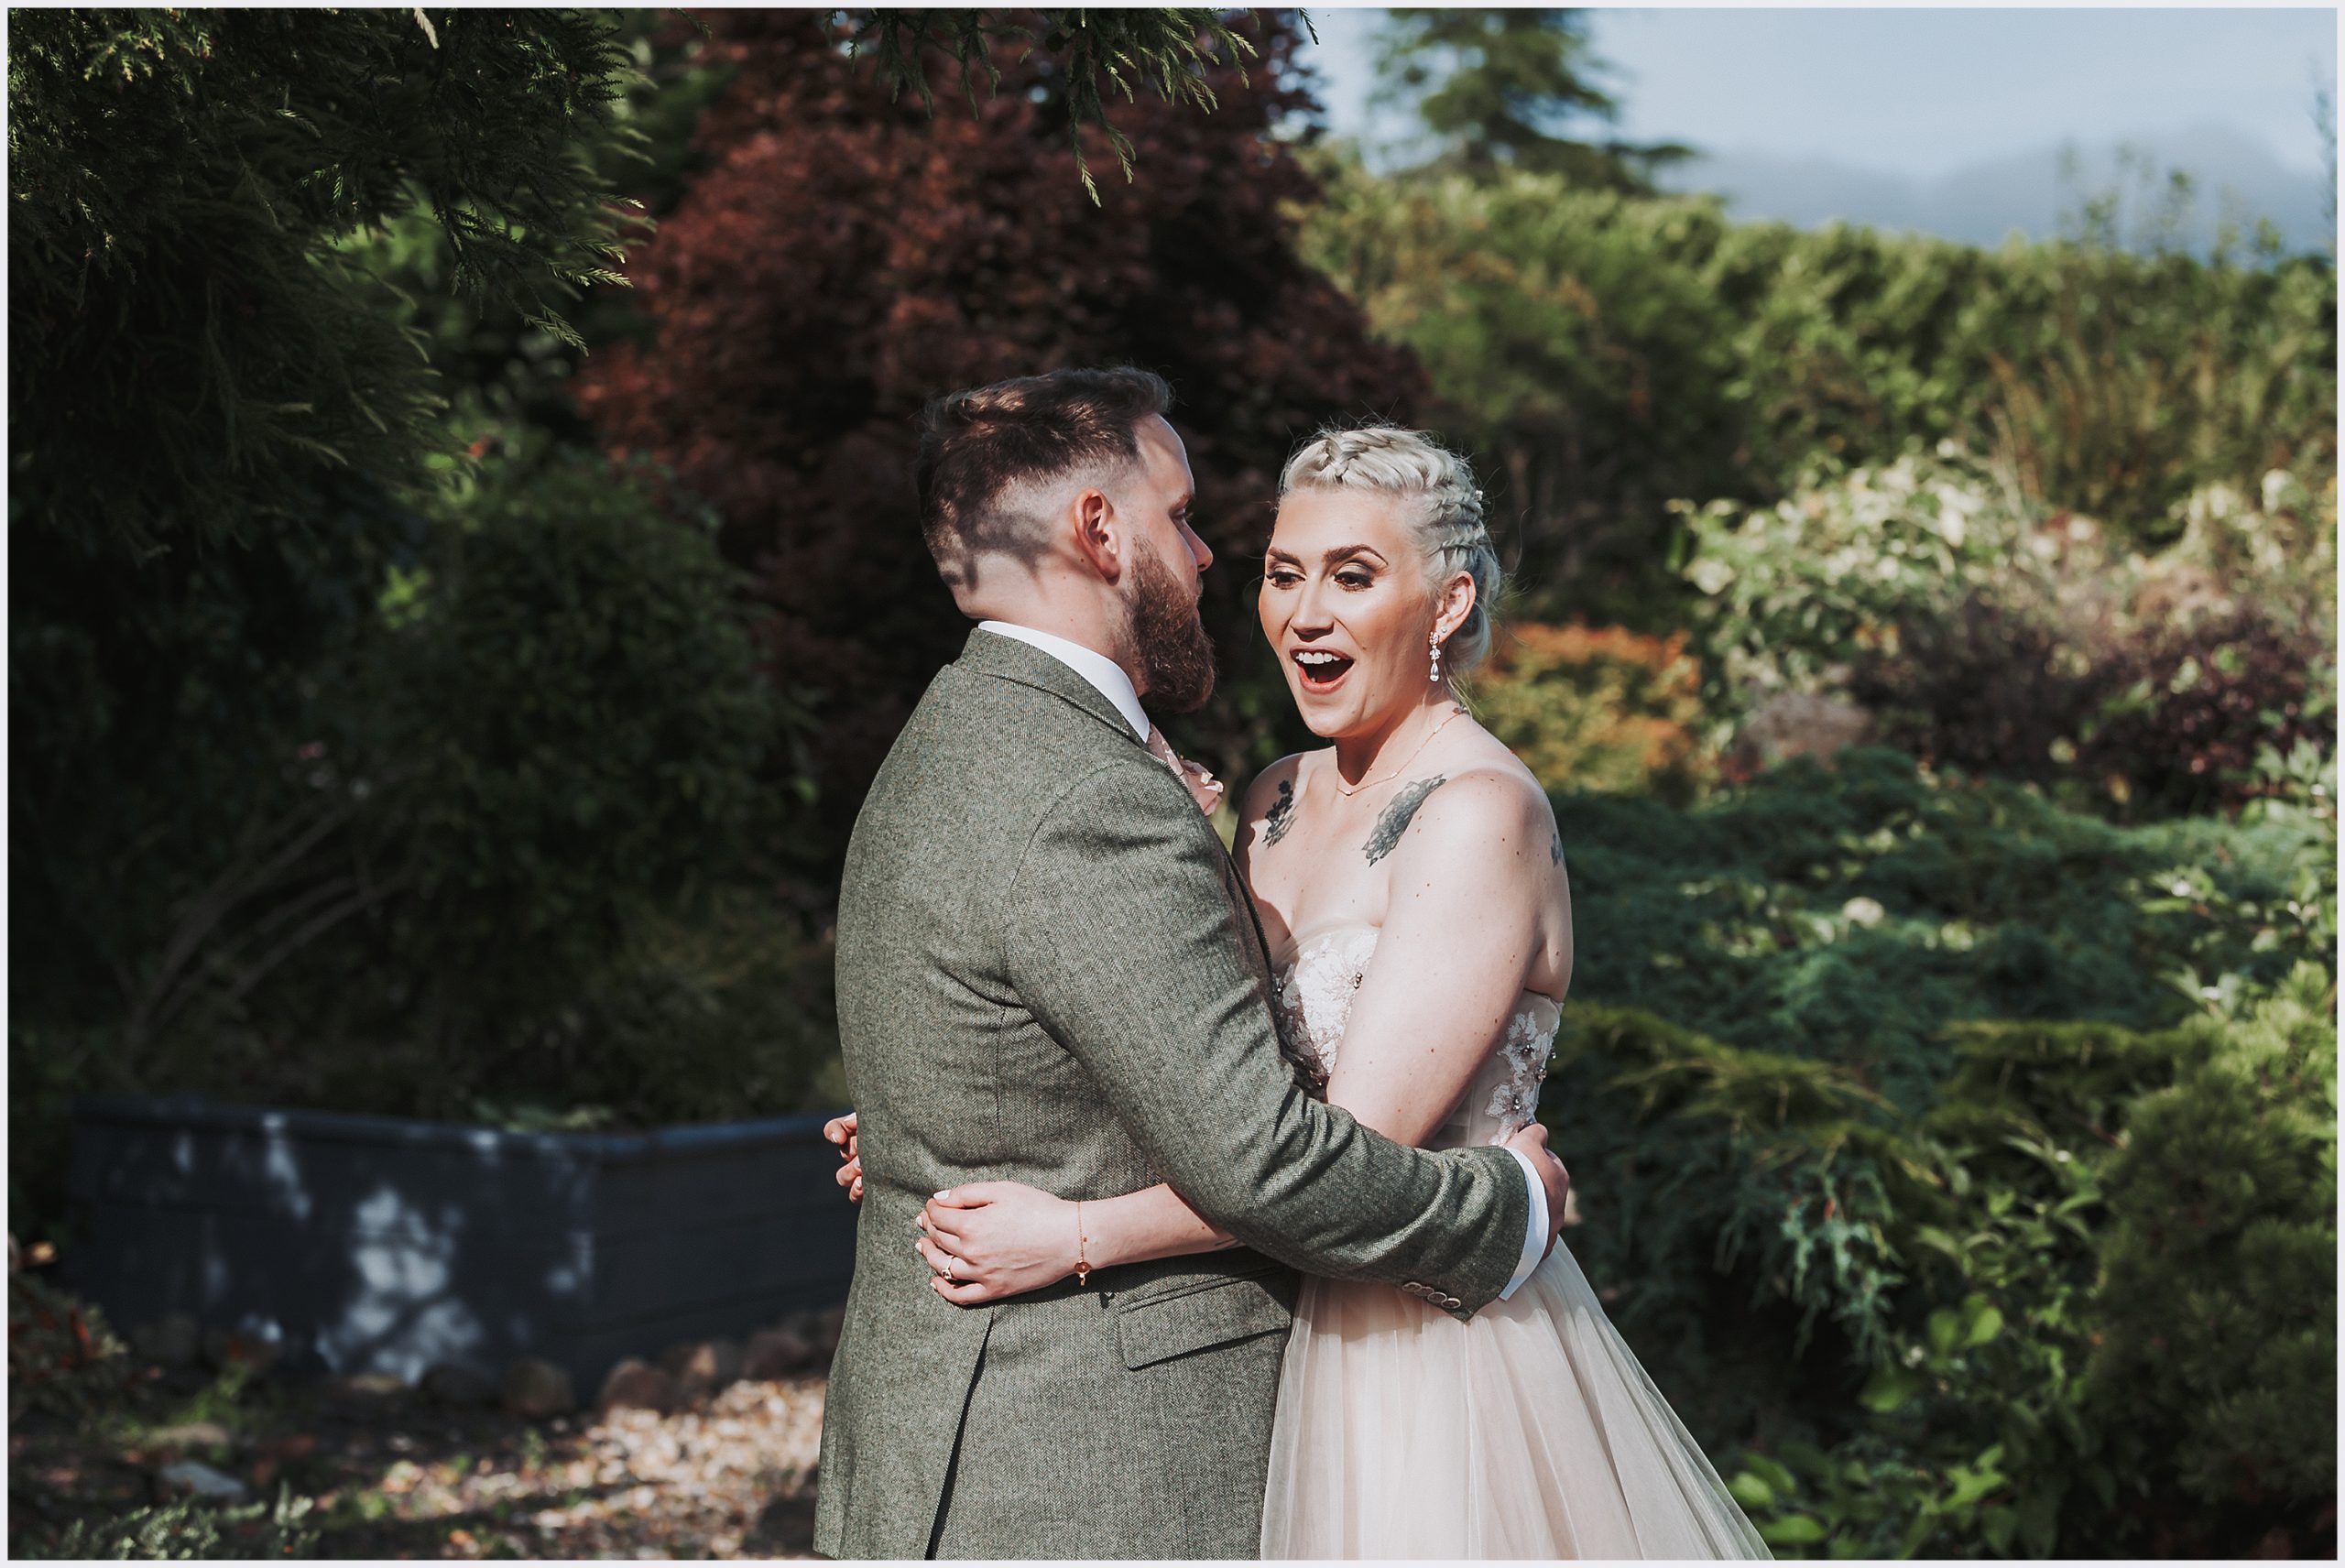 Cheshire's Cherished Moment: Bride and Groom Sharing Laughter and Love